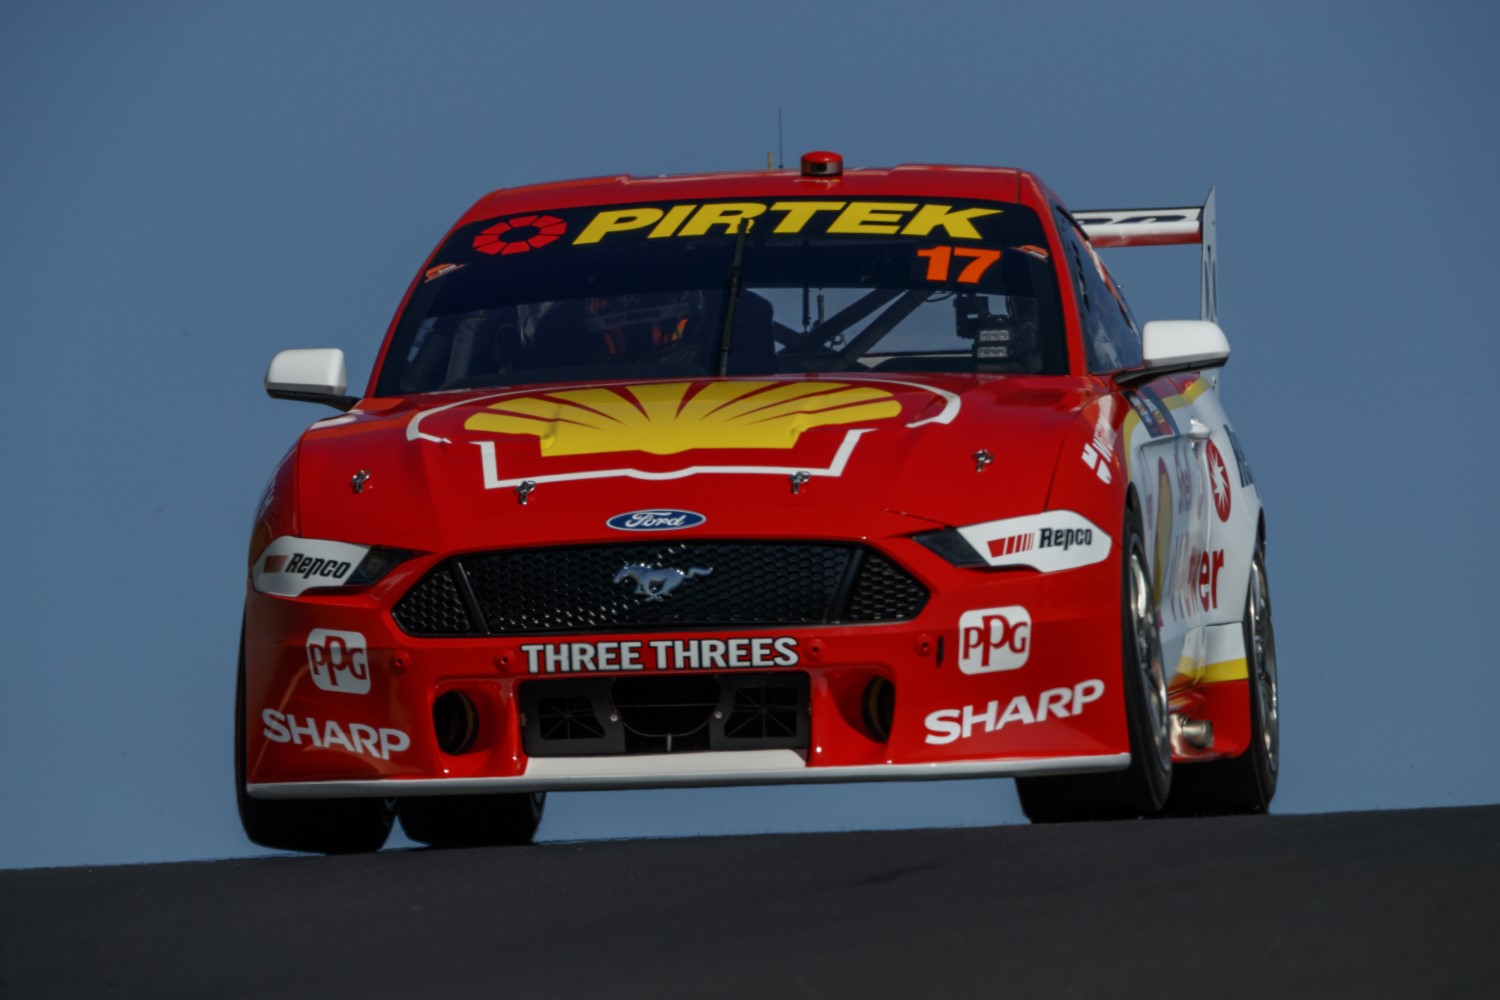 No wonder that Penske Mustang was so fast at Bathurst and is much slower this weekend at Sundown